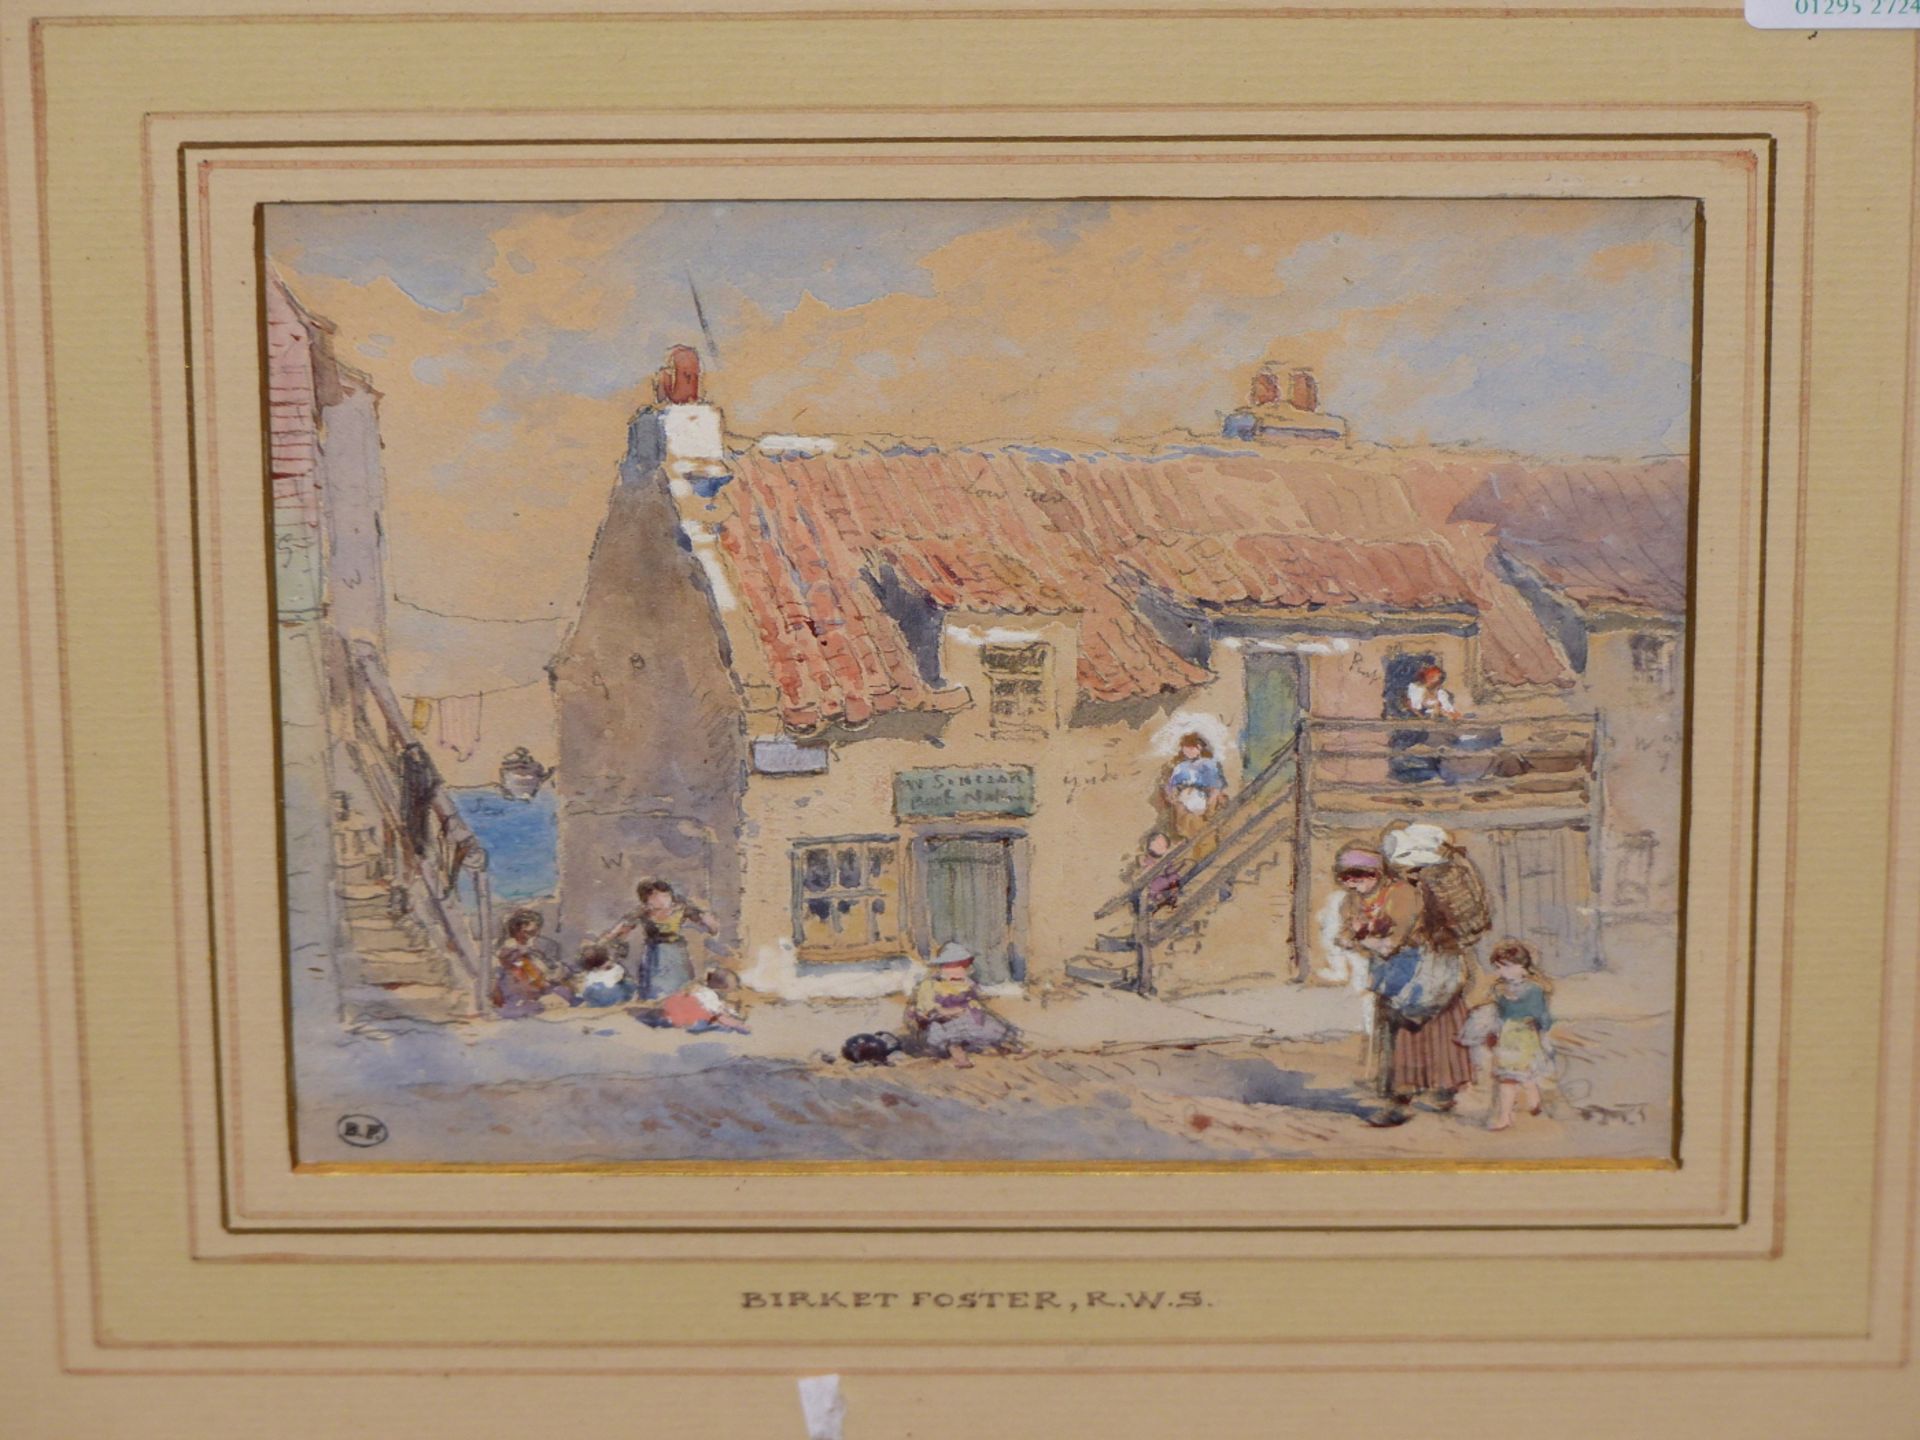 ATTRIBUTED TO MYLES BIRKET FOSTER (1825-99), NEWHAVEN, A MOTHER AND CHILDREN ABOUT A HOUSE ON A - Image 2 of 6